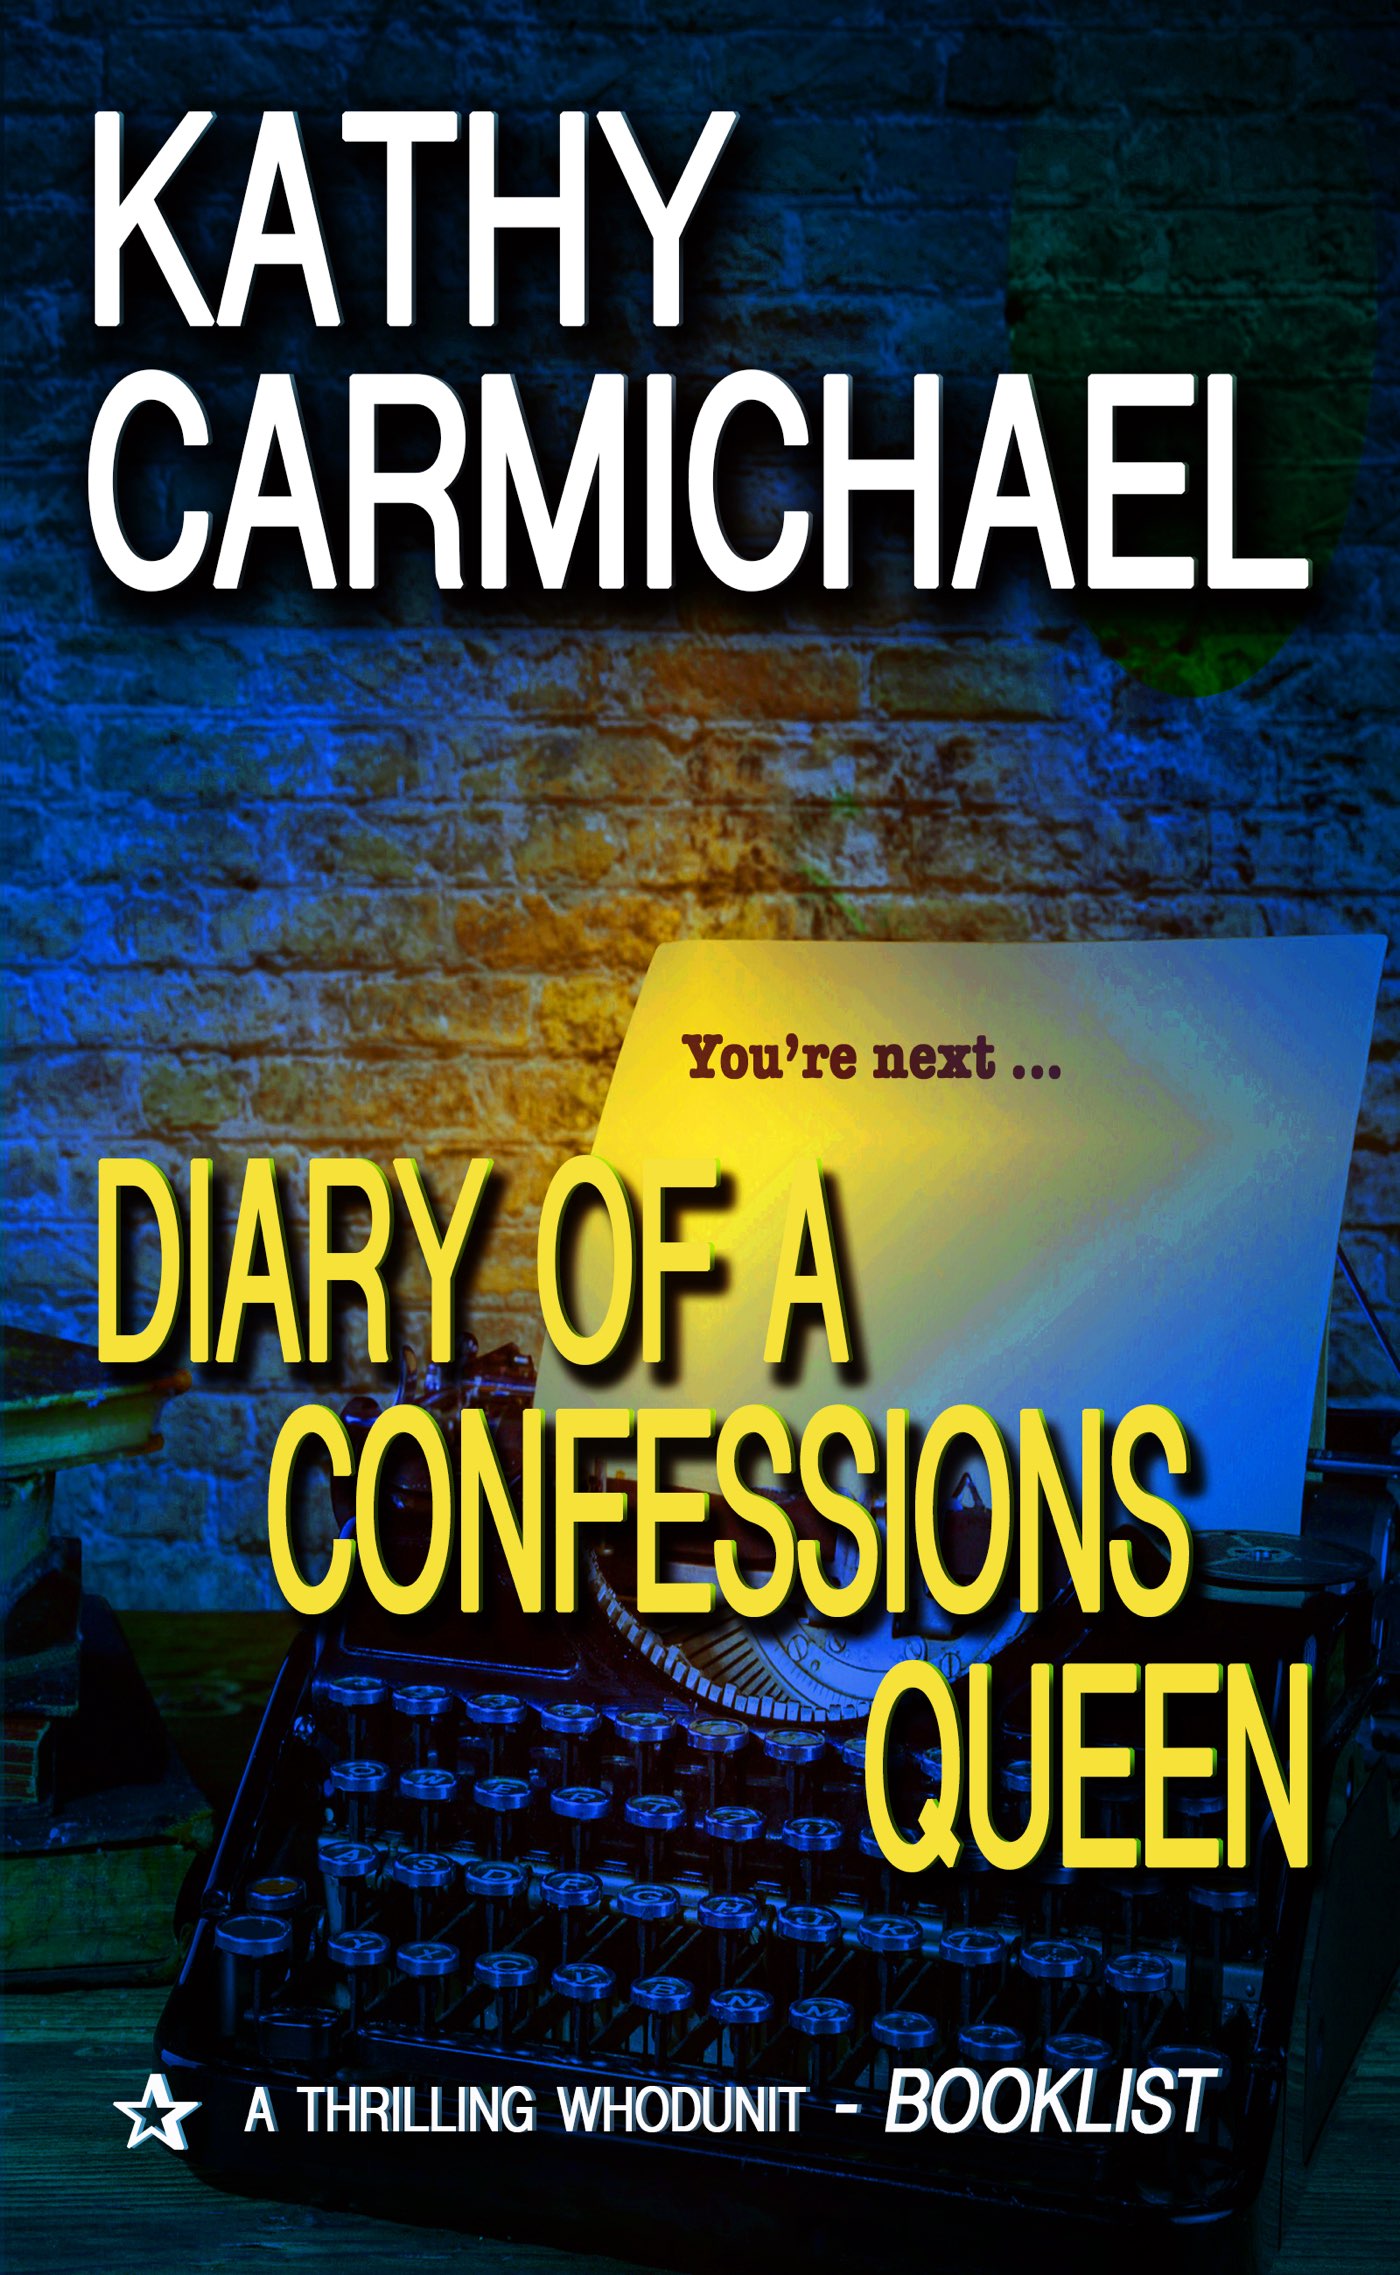 Diary of a Confessions Queen